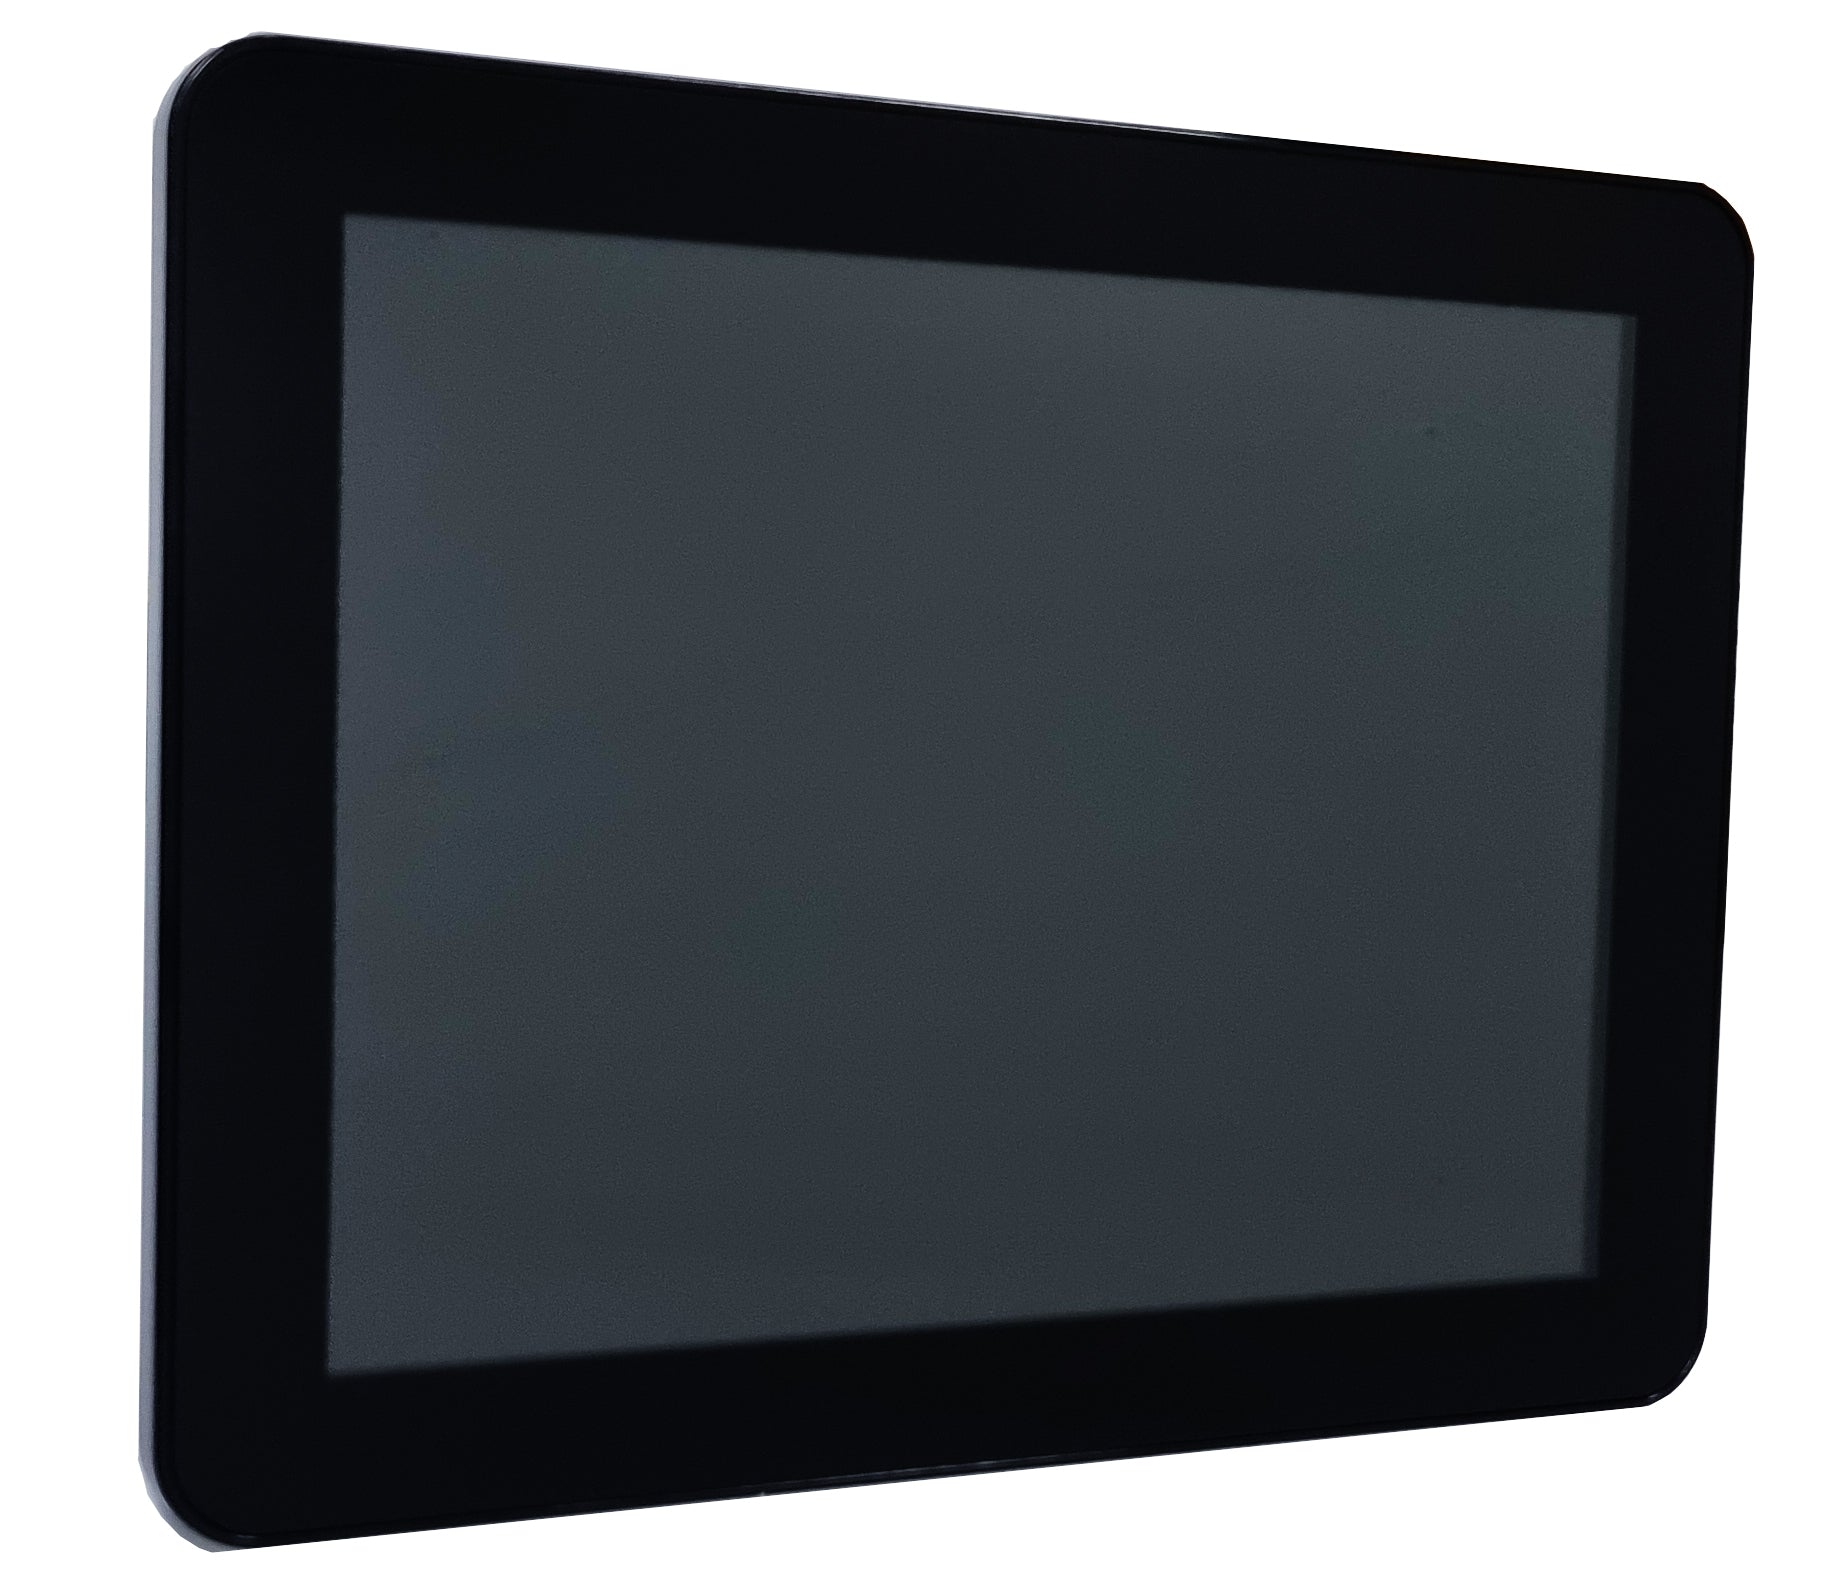 BST 9.7" Customer Touch Display, Black and White